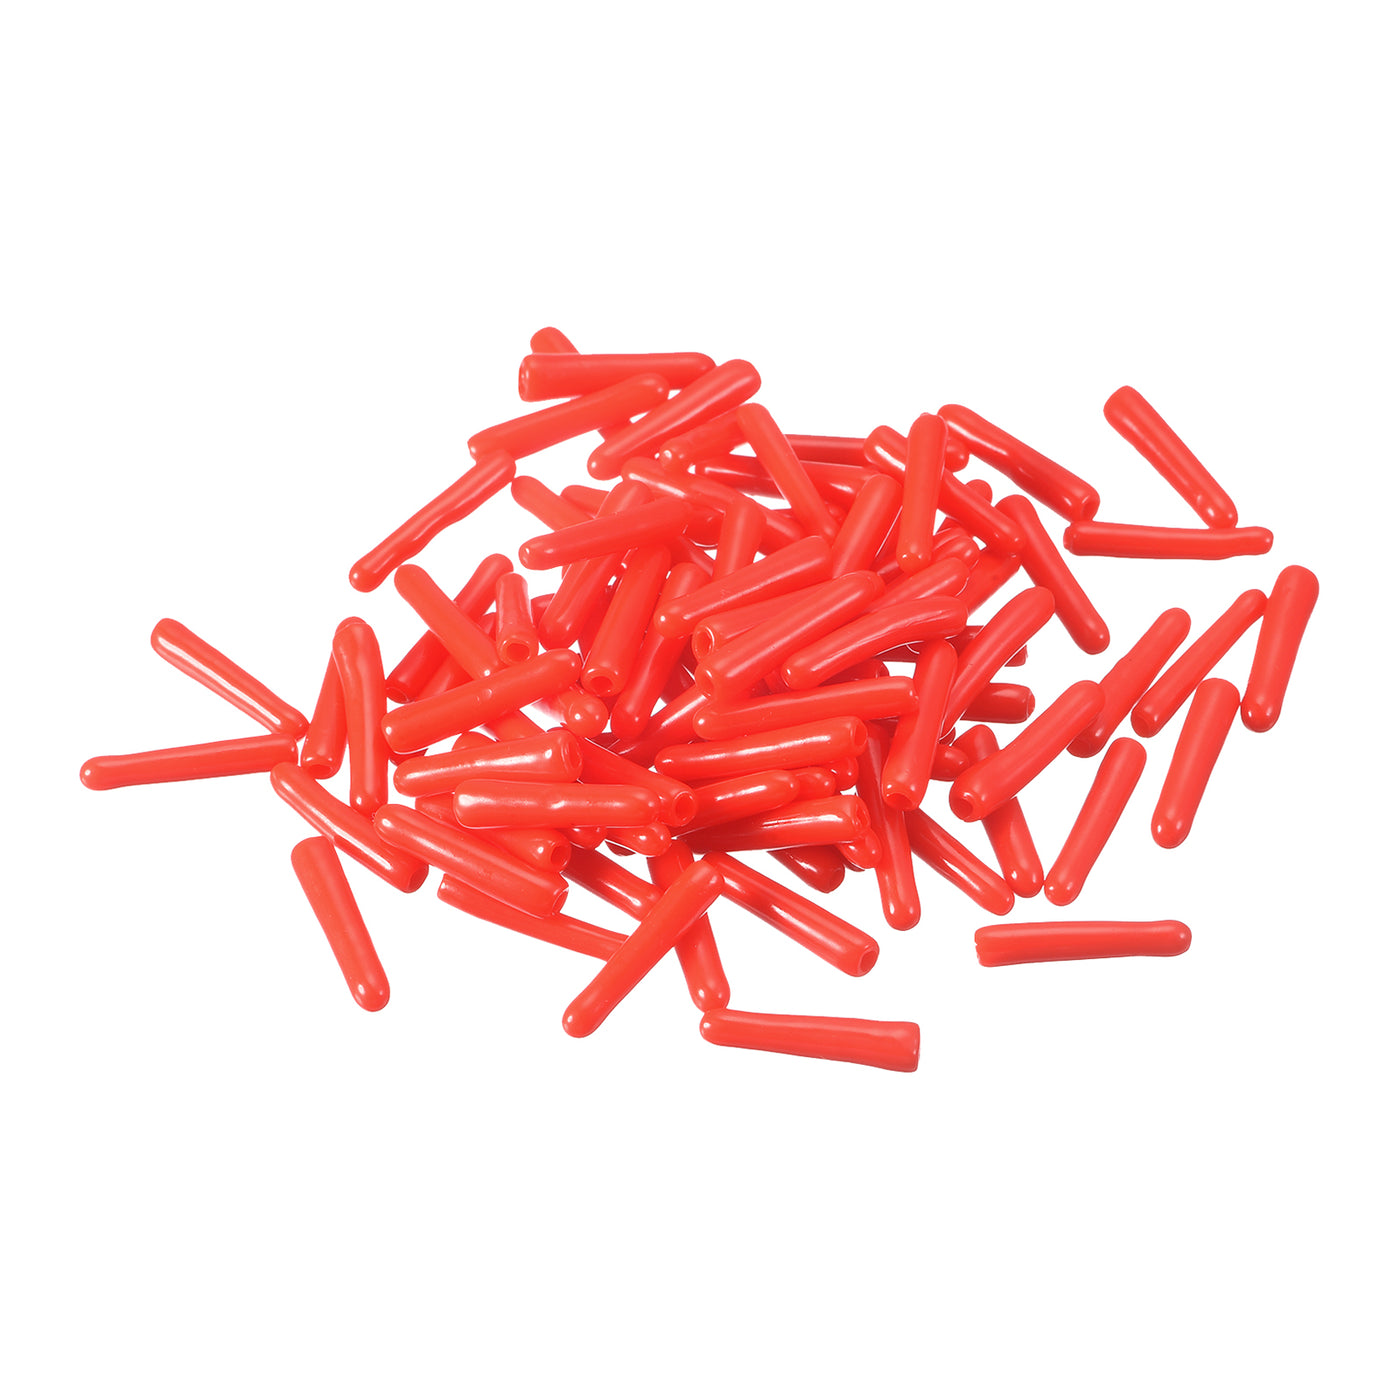 uxcell Uxcell Rubber End Caps, 100Pcs 1.5mm Screw Thread Protector for Tube Bolt Cover, Red